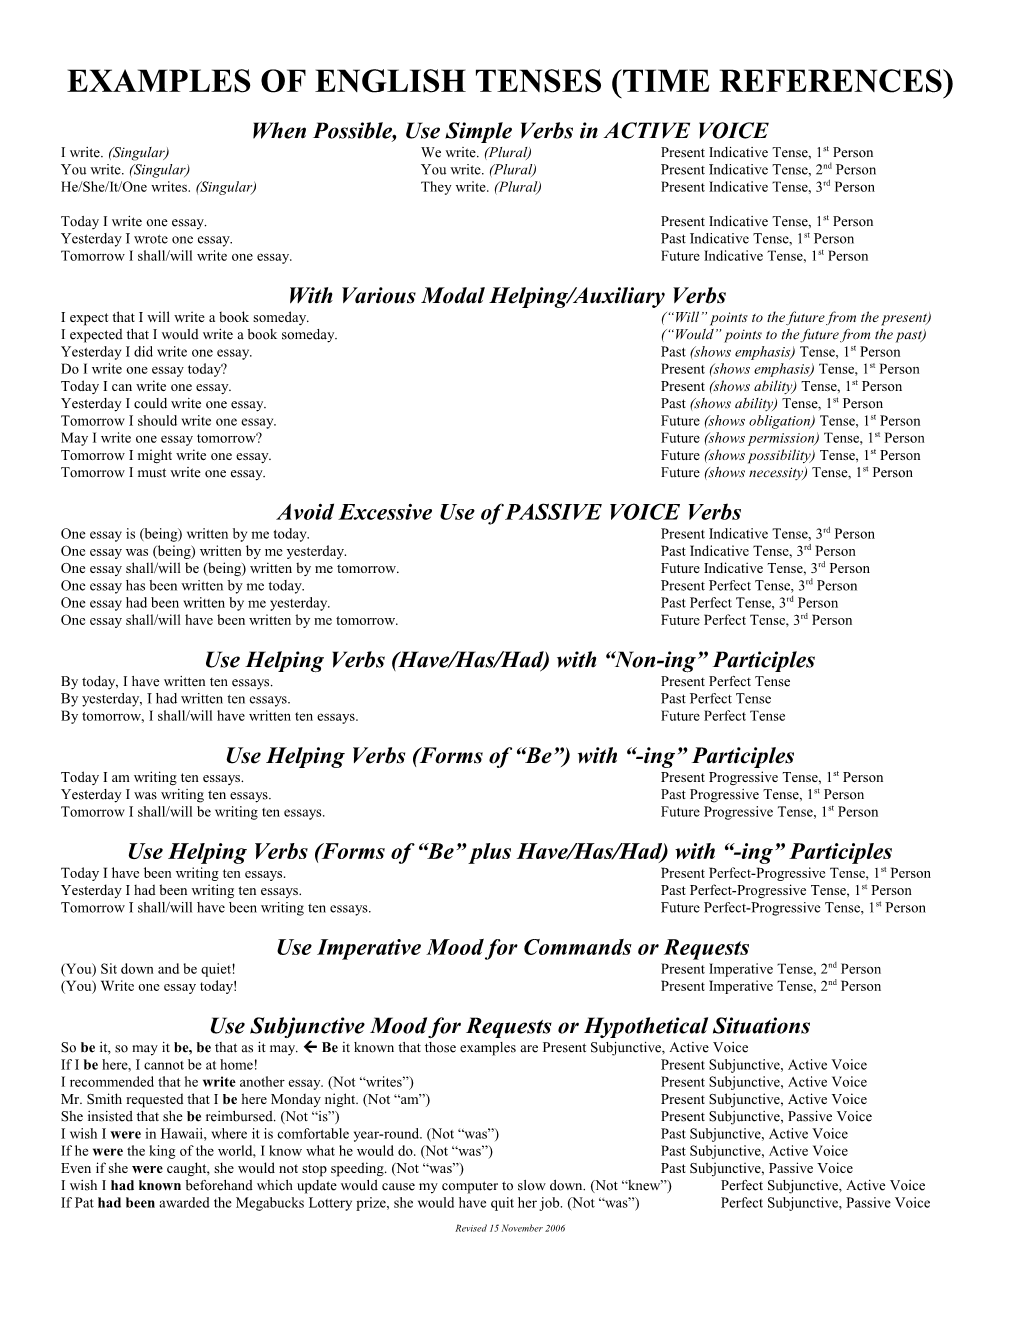 Examples of English Tenses (Time References)